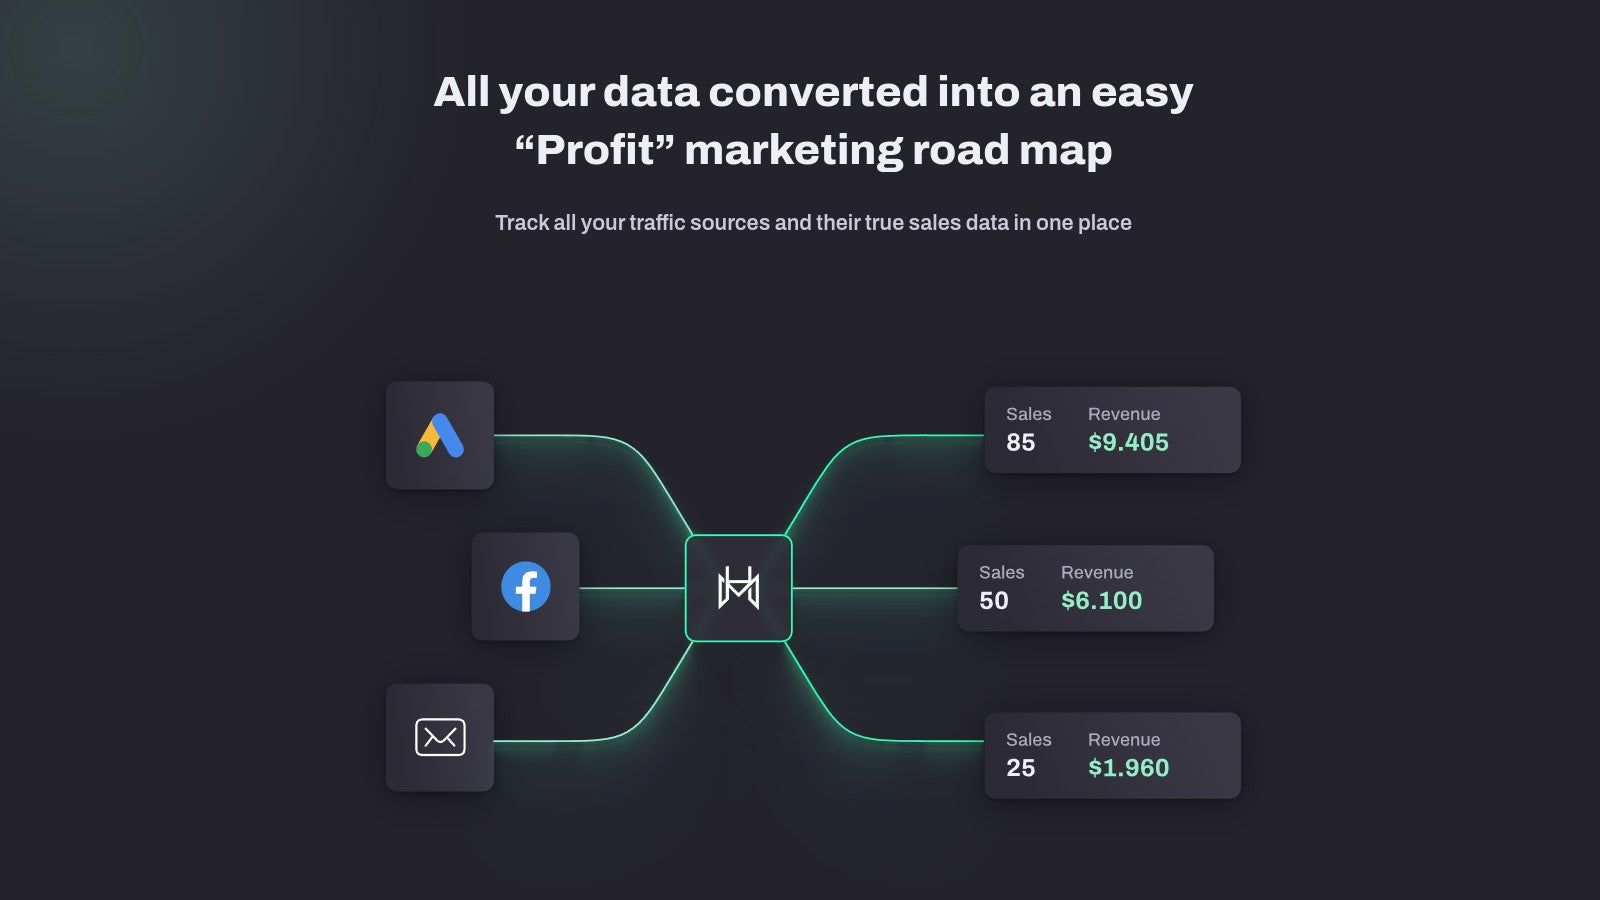 Track all your traffic sources and their true sales data